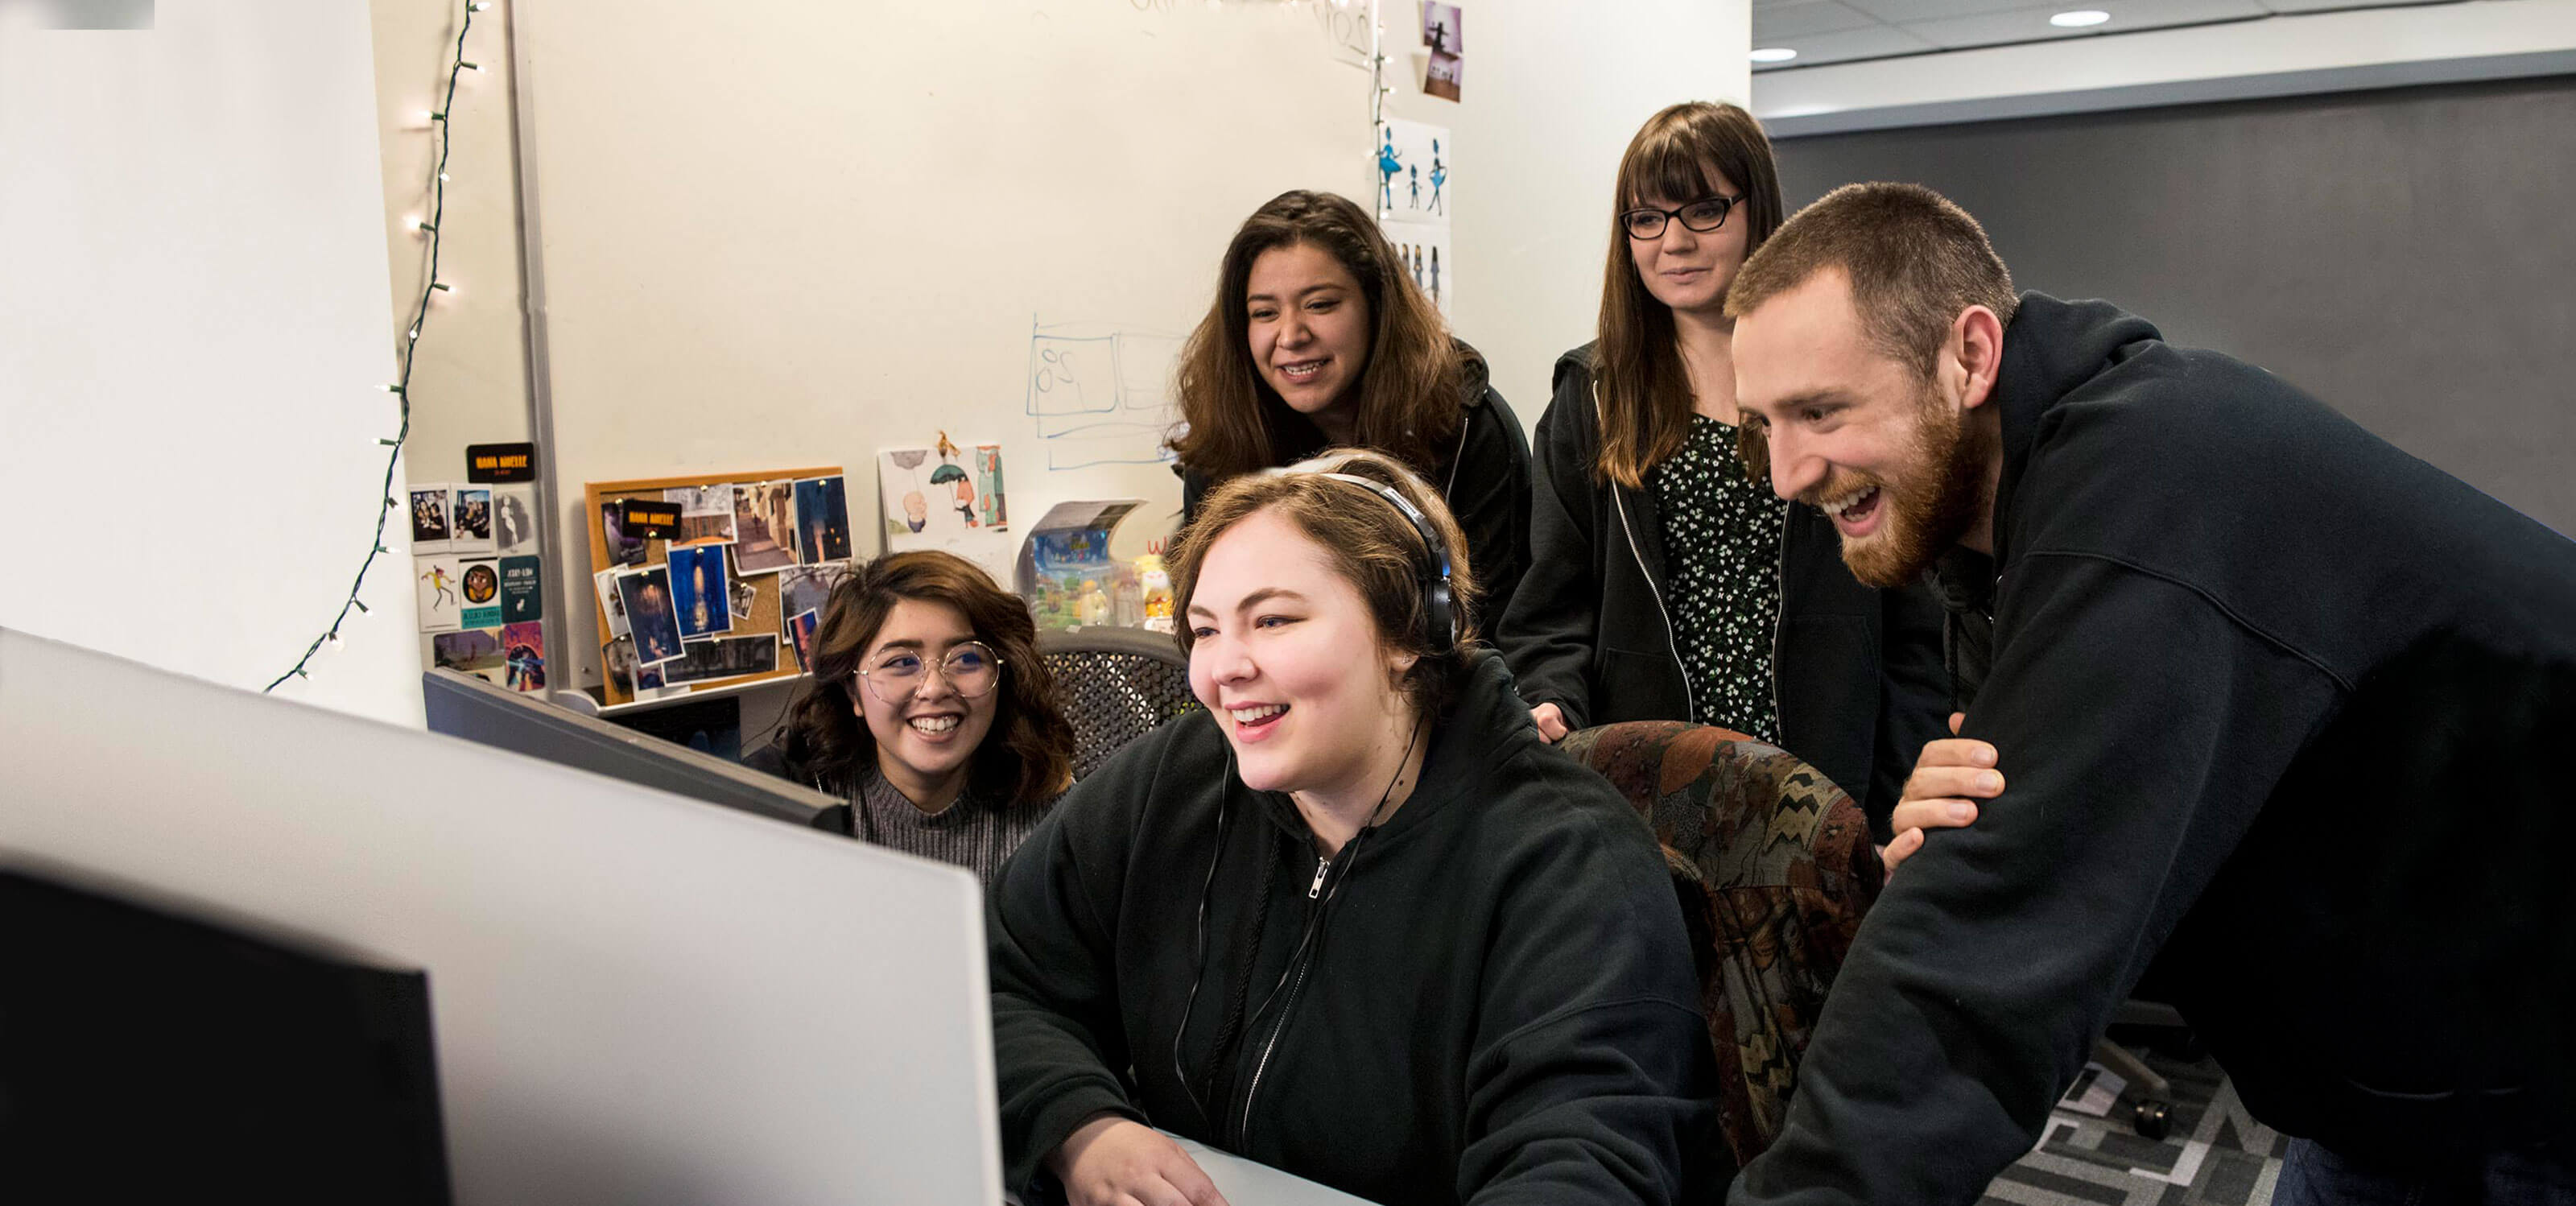 A group of smiling people stand behind a woman sitting at a computer monitor, looking over her shoulder.